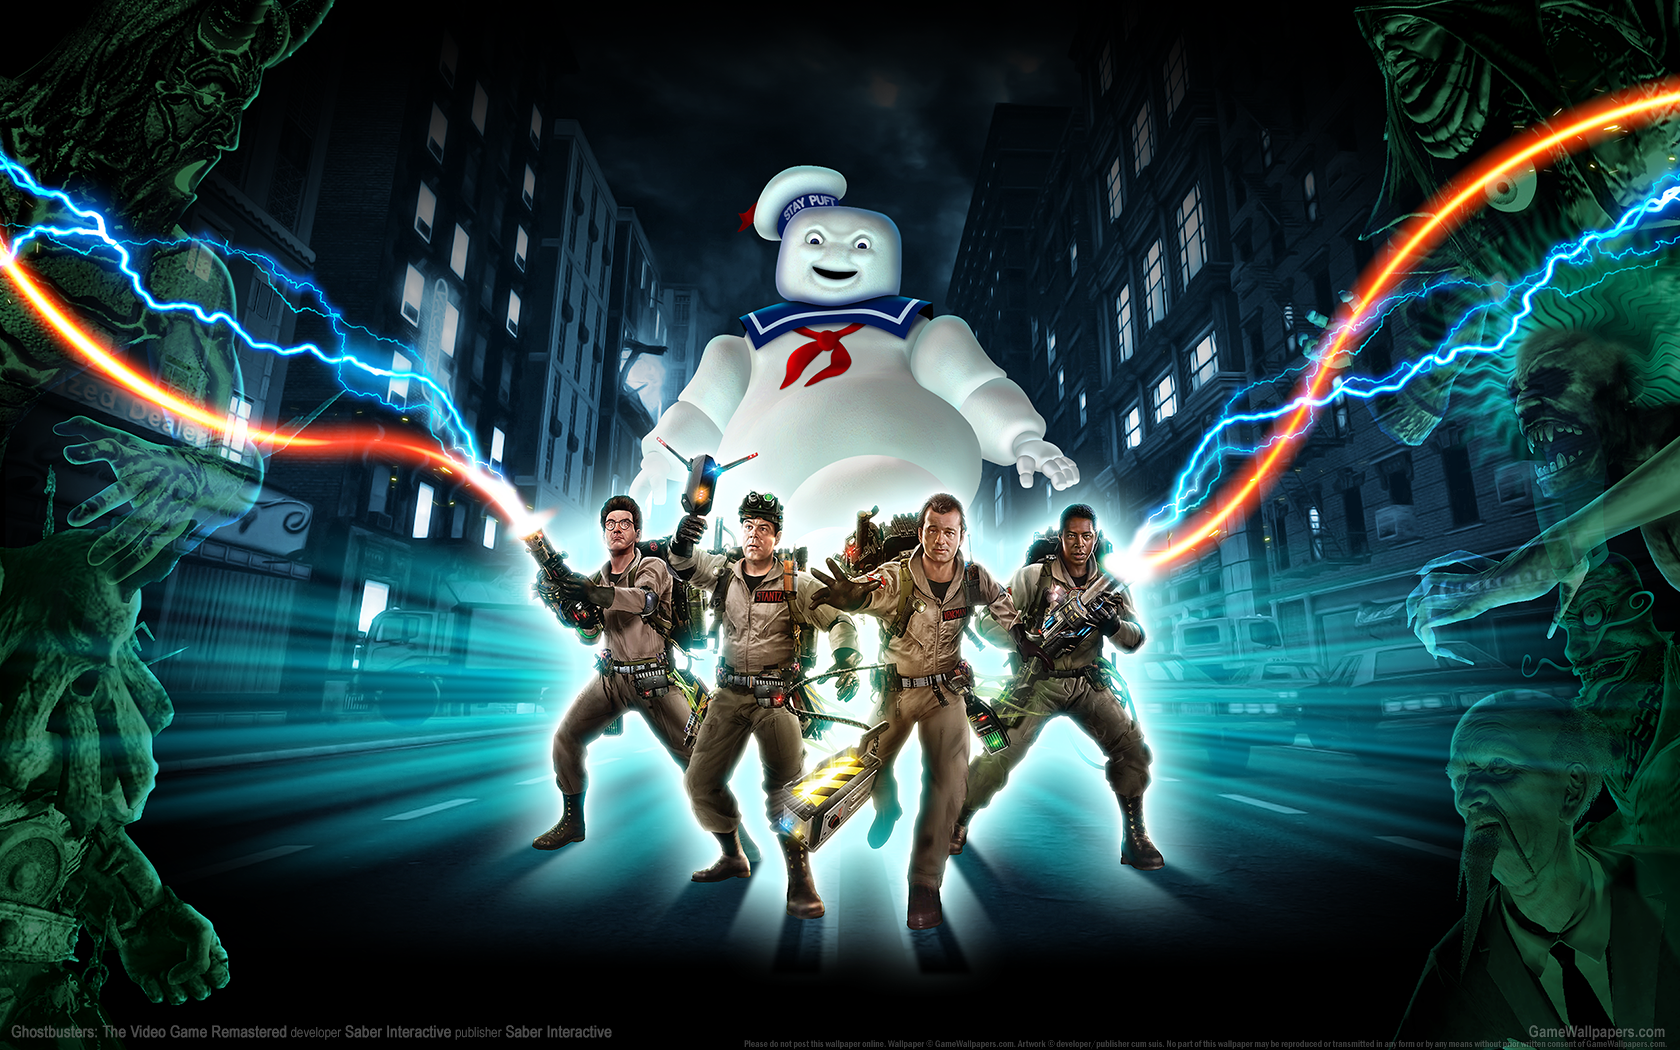 Ghostbusters: The Video Game Remastered 1680x1050 fond d'cran 01